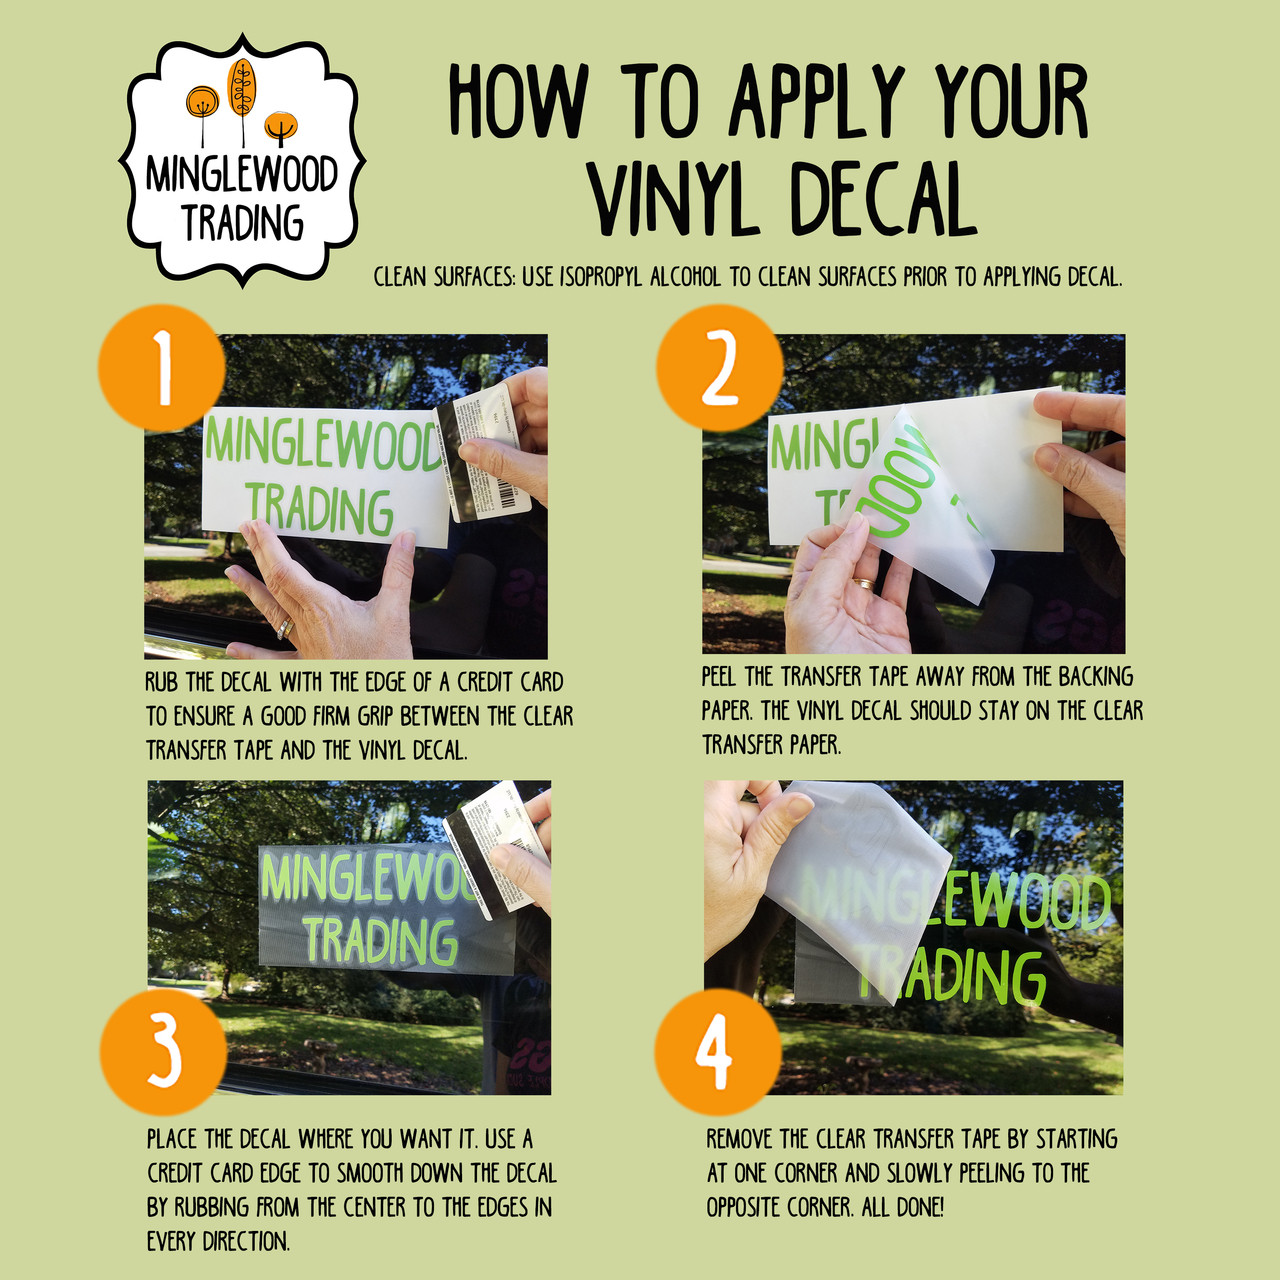 Vinyl sticker application instructions by Minglewood Trading.